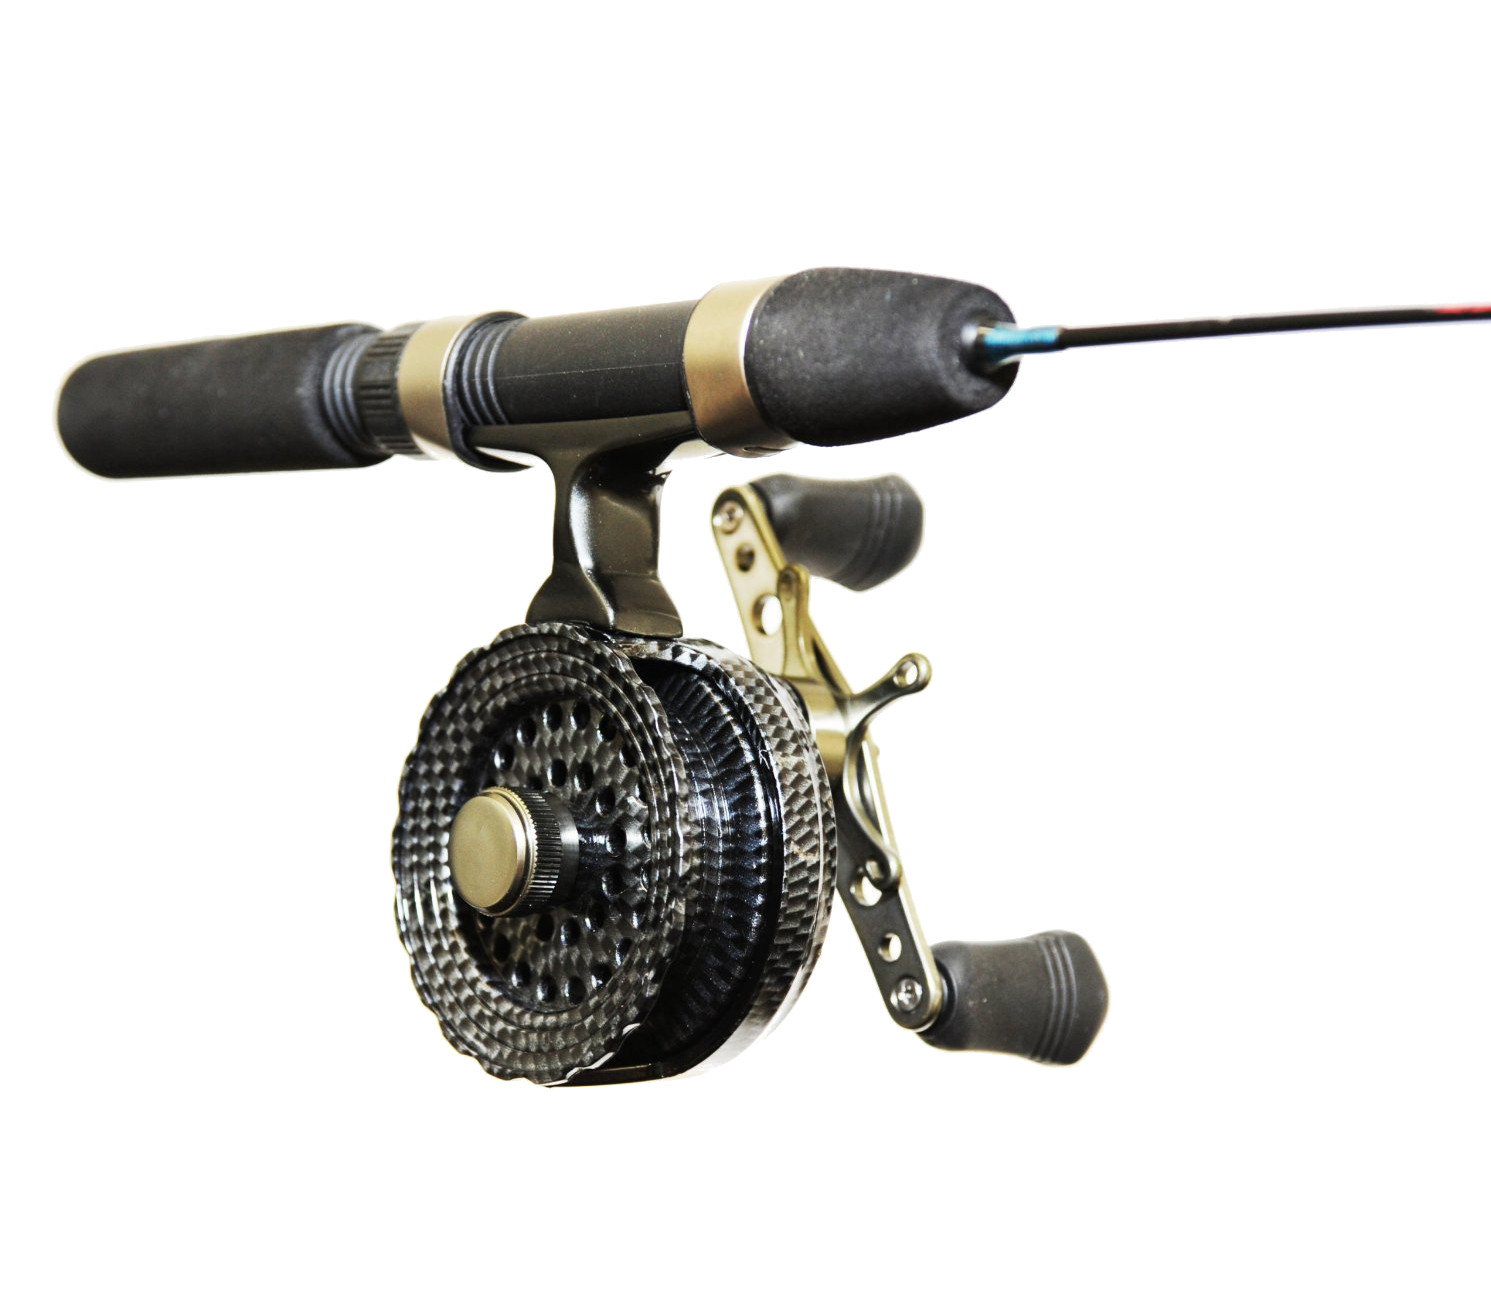 Best Ice Fishing Rods 2018 Review & Buyer's Guide